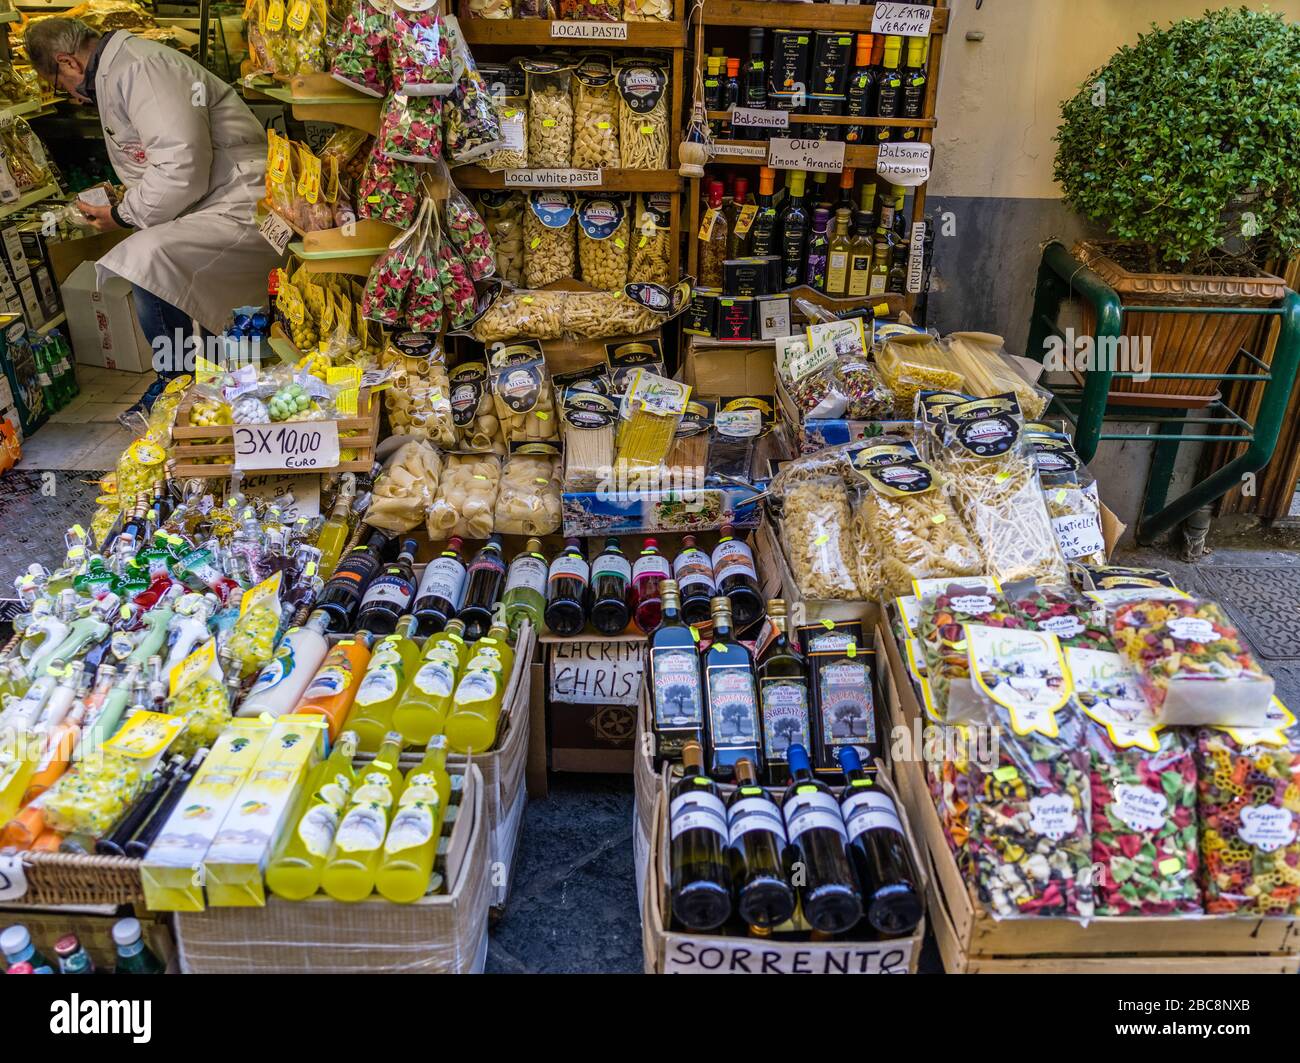 Grocery store in Sorrento Stock Photo